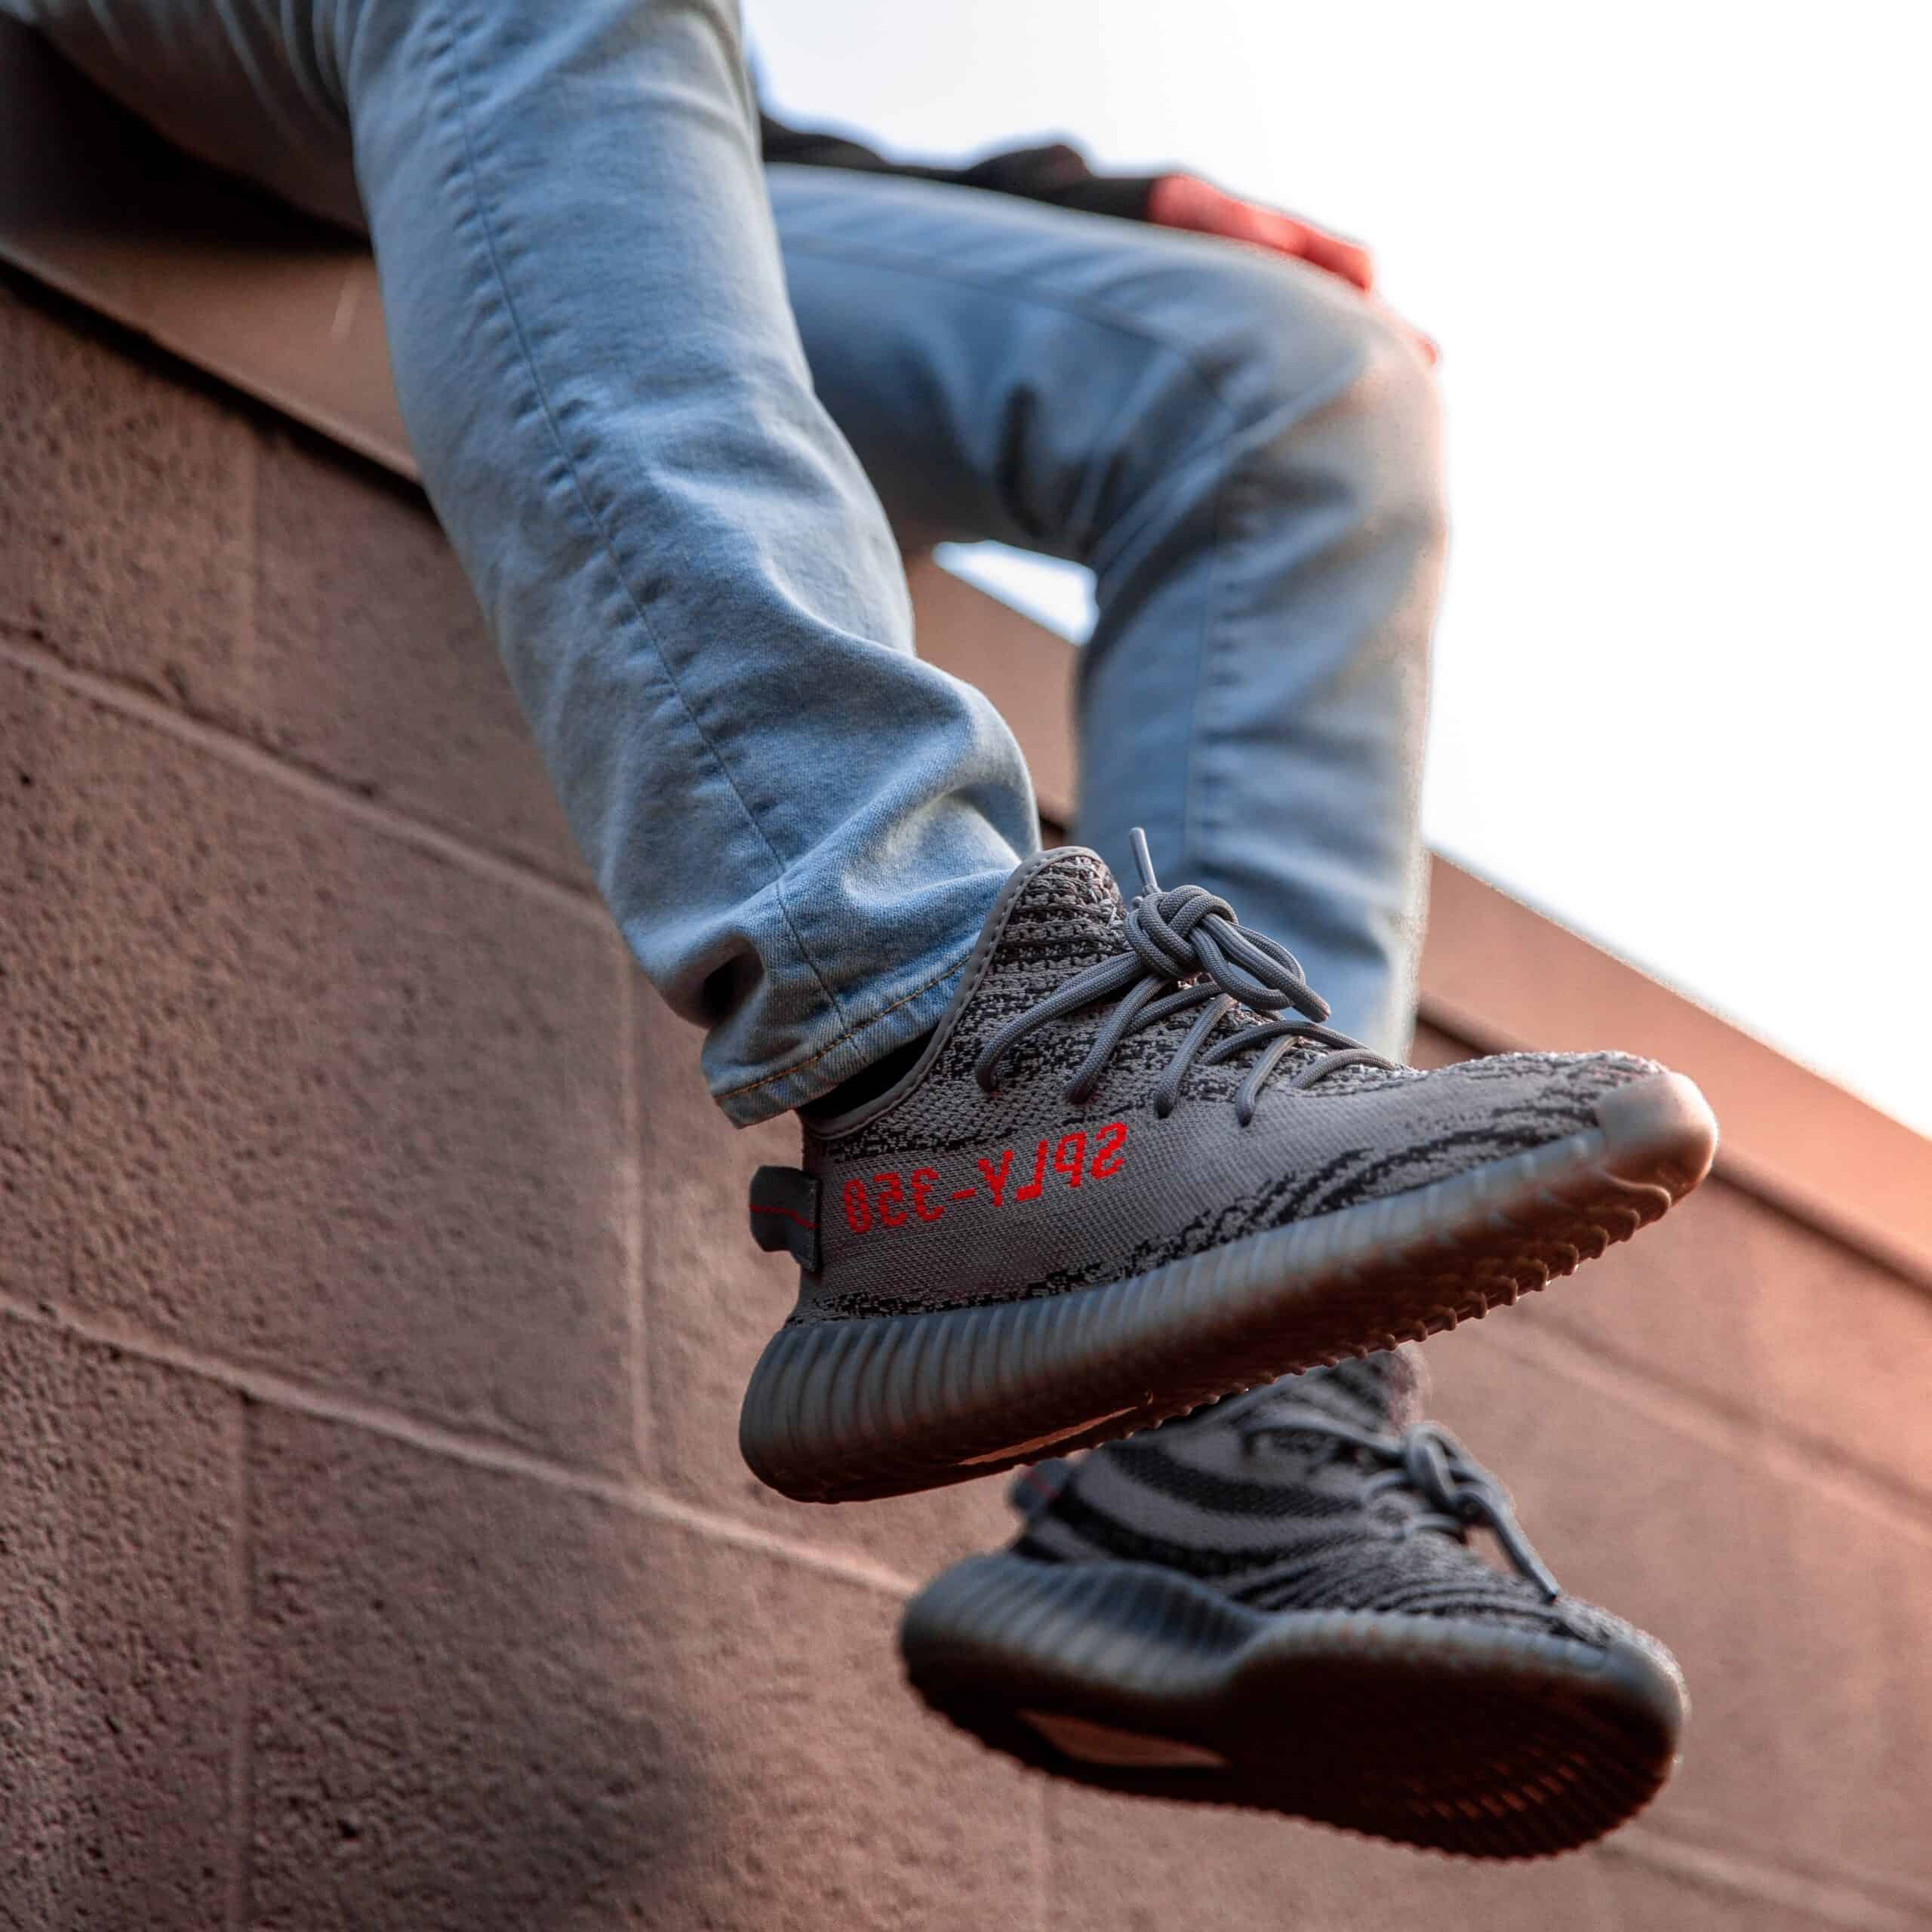 12 Yeezy Alternatives: Great Options To Save Some Money